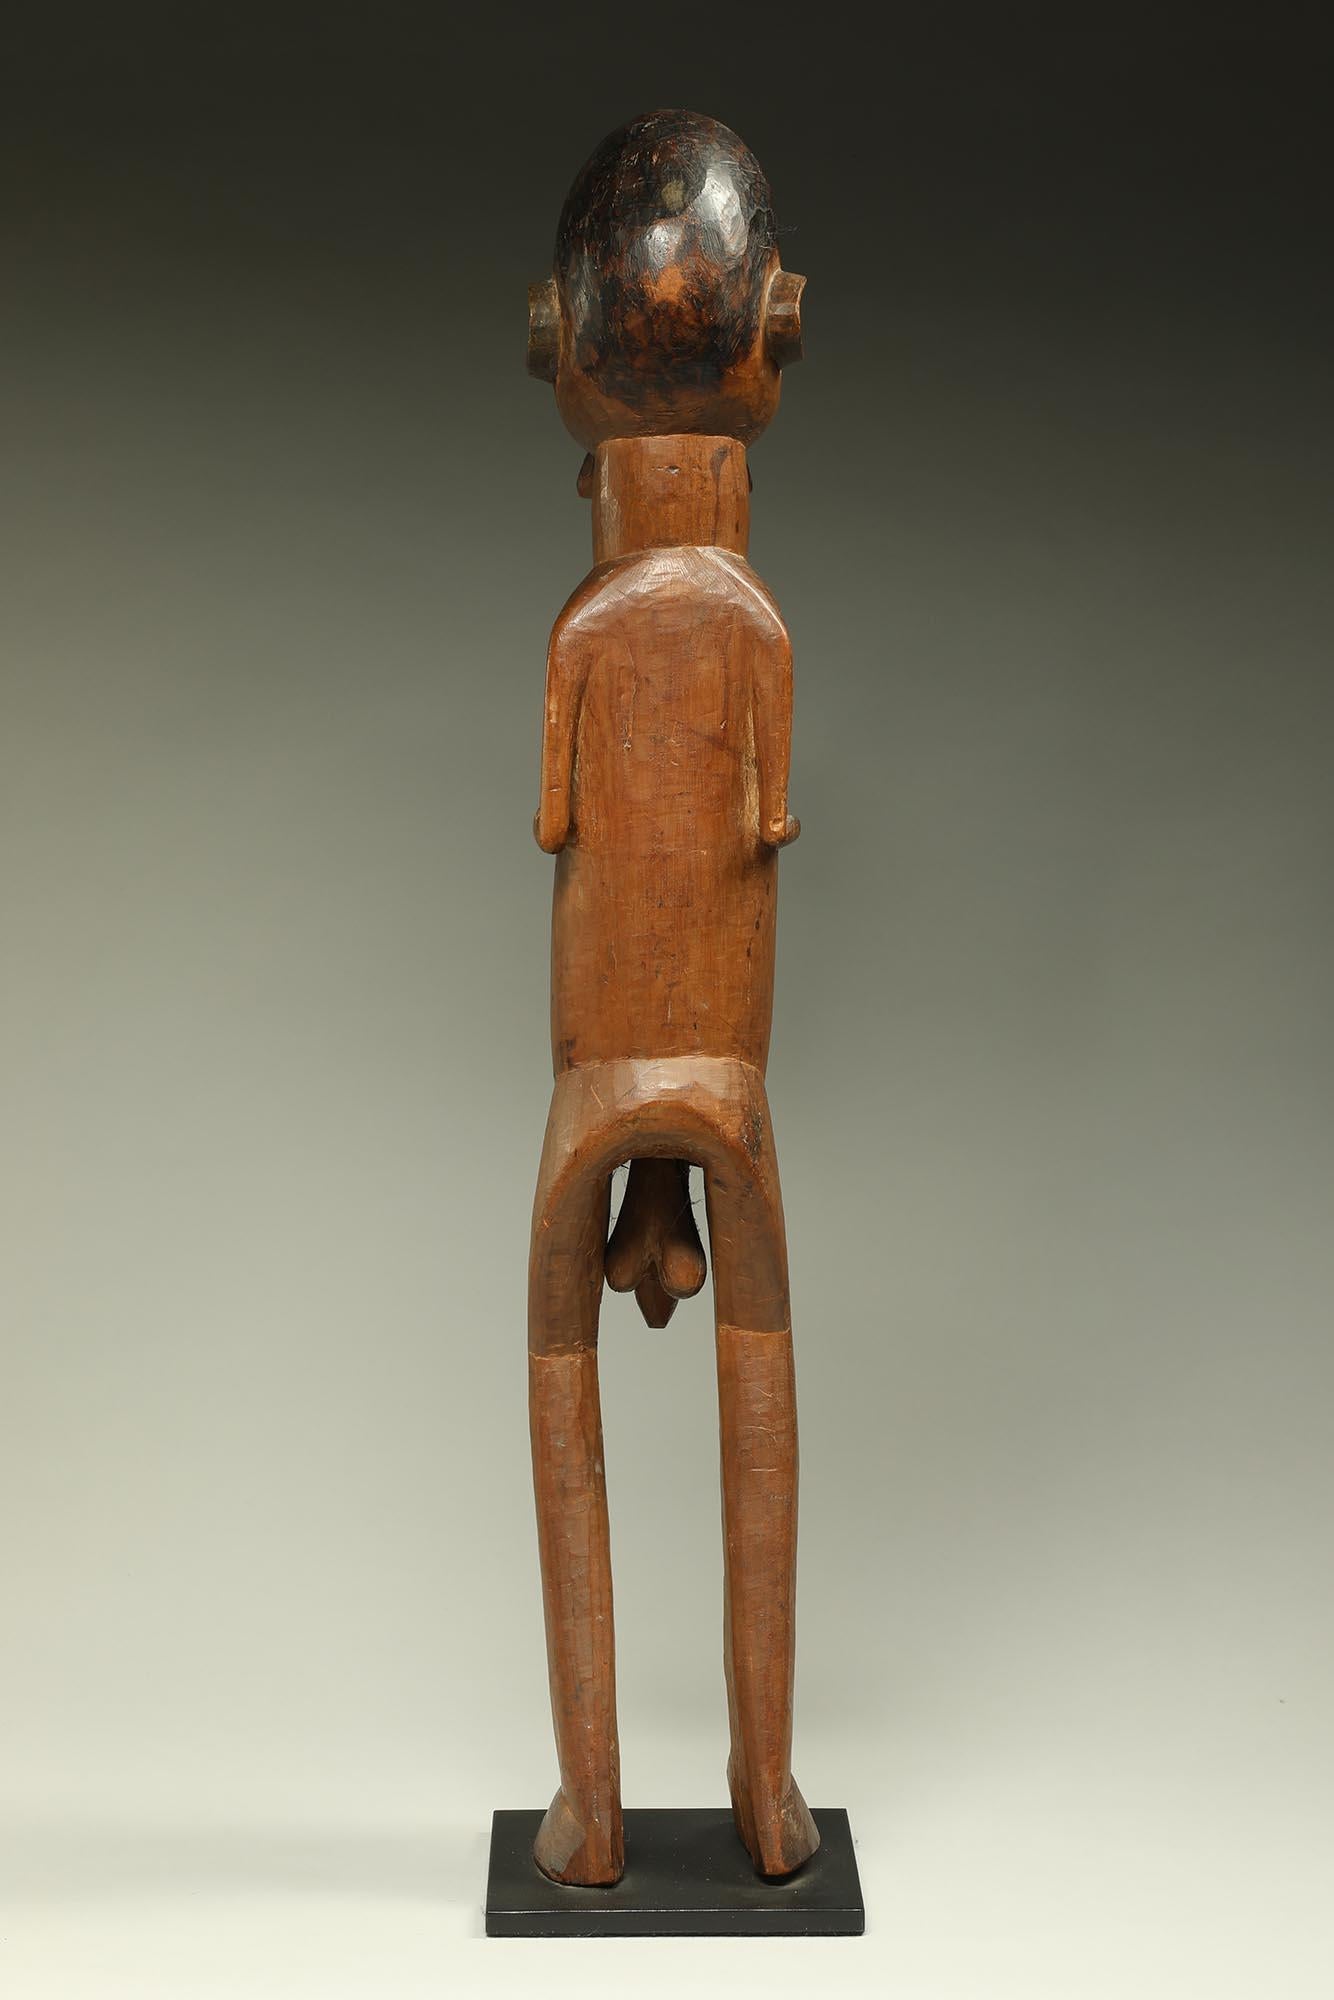 Large standing male Teke figure with expressive face, beard, Congo, DRC Africa 2